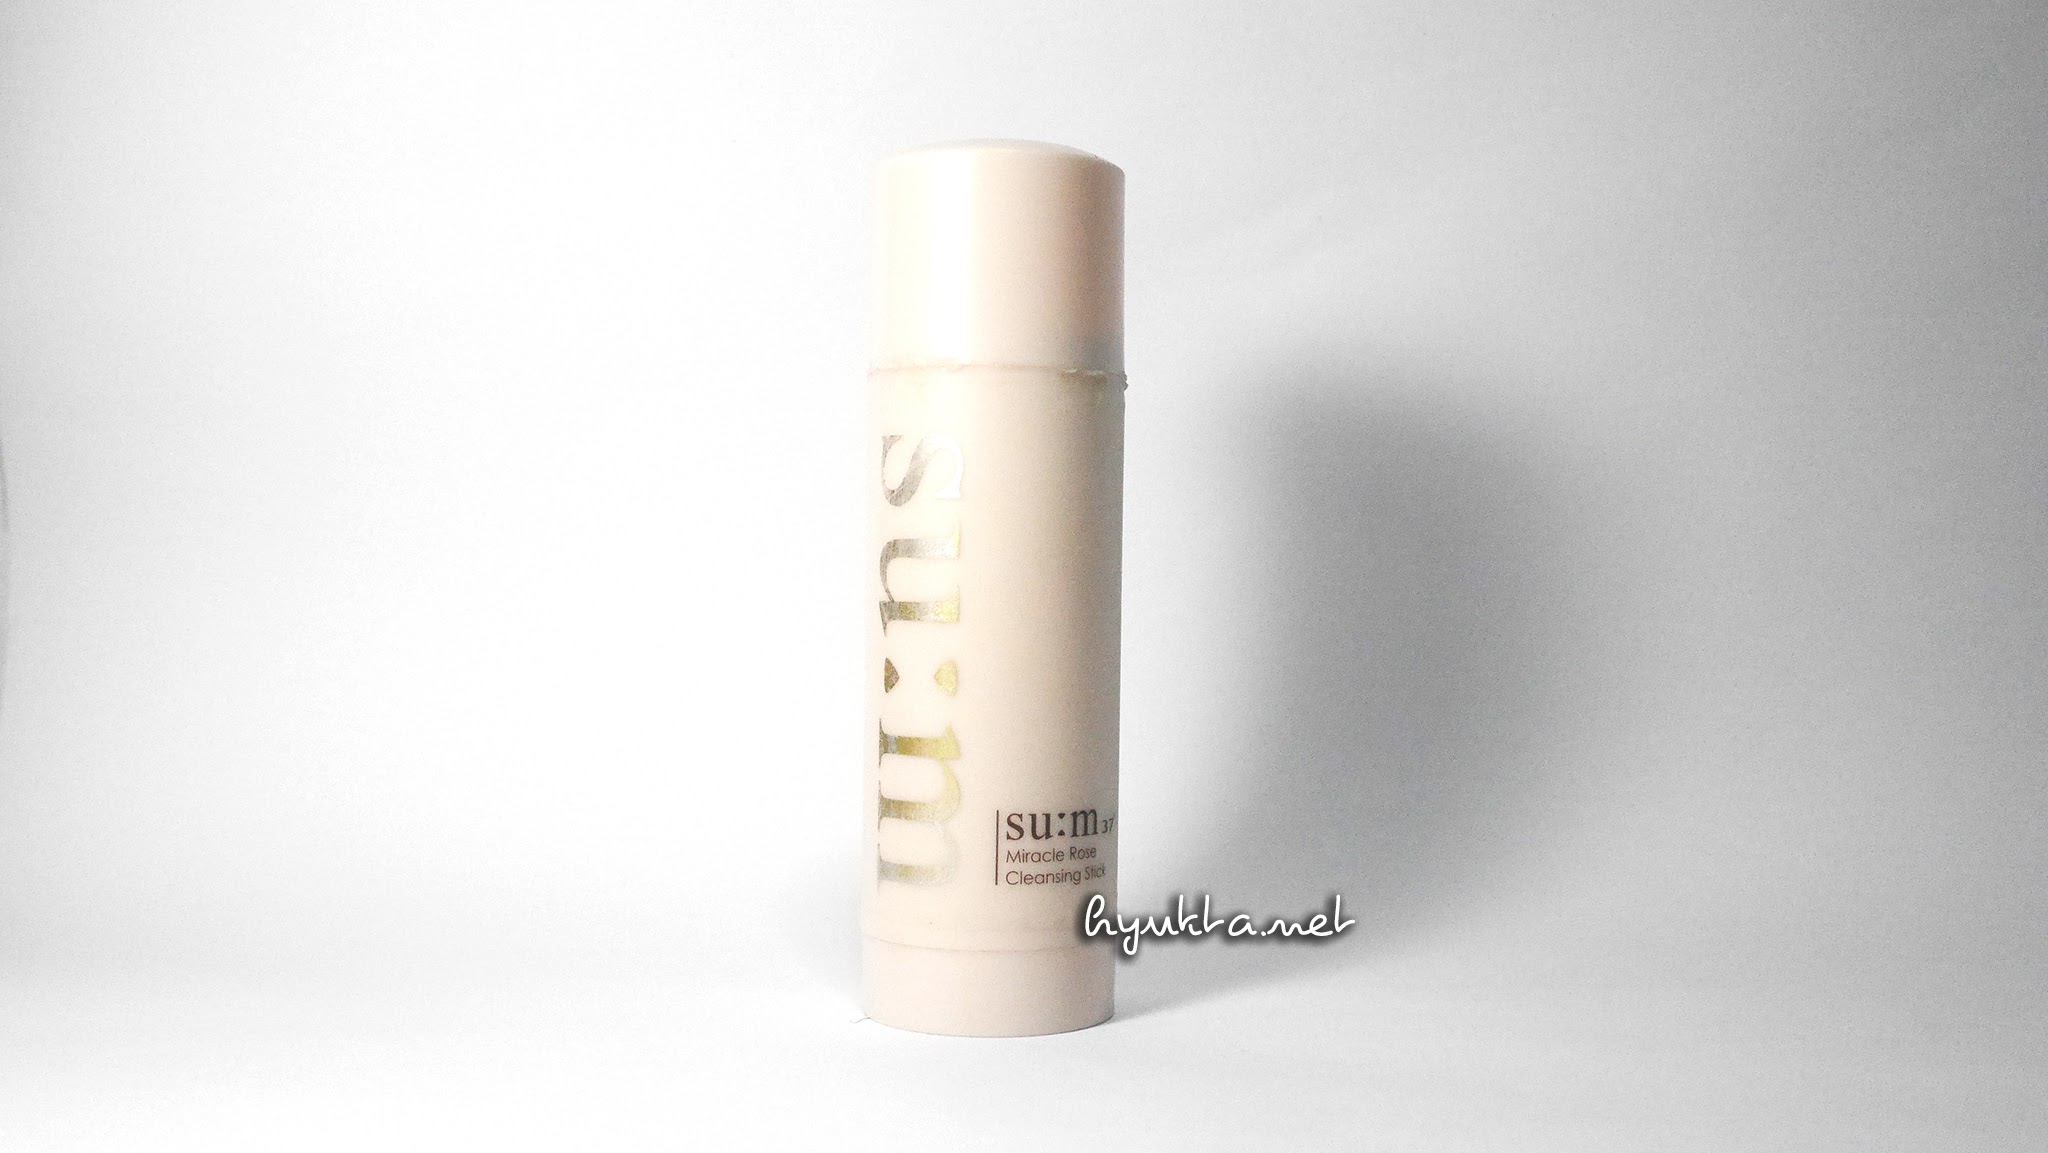 SU:M37 Miracle Rose Cleansing Stick